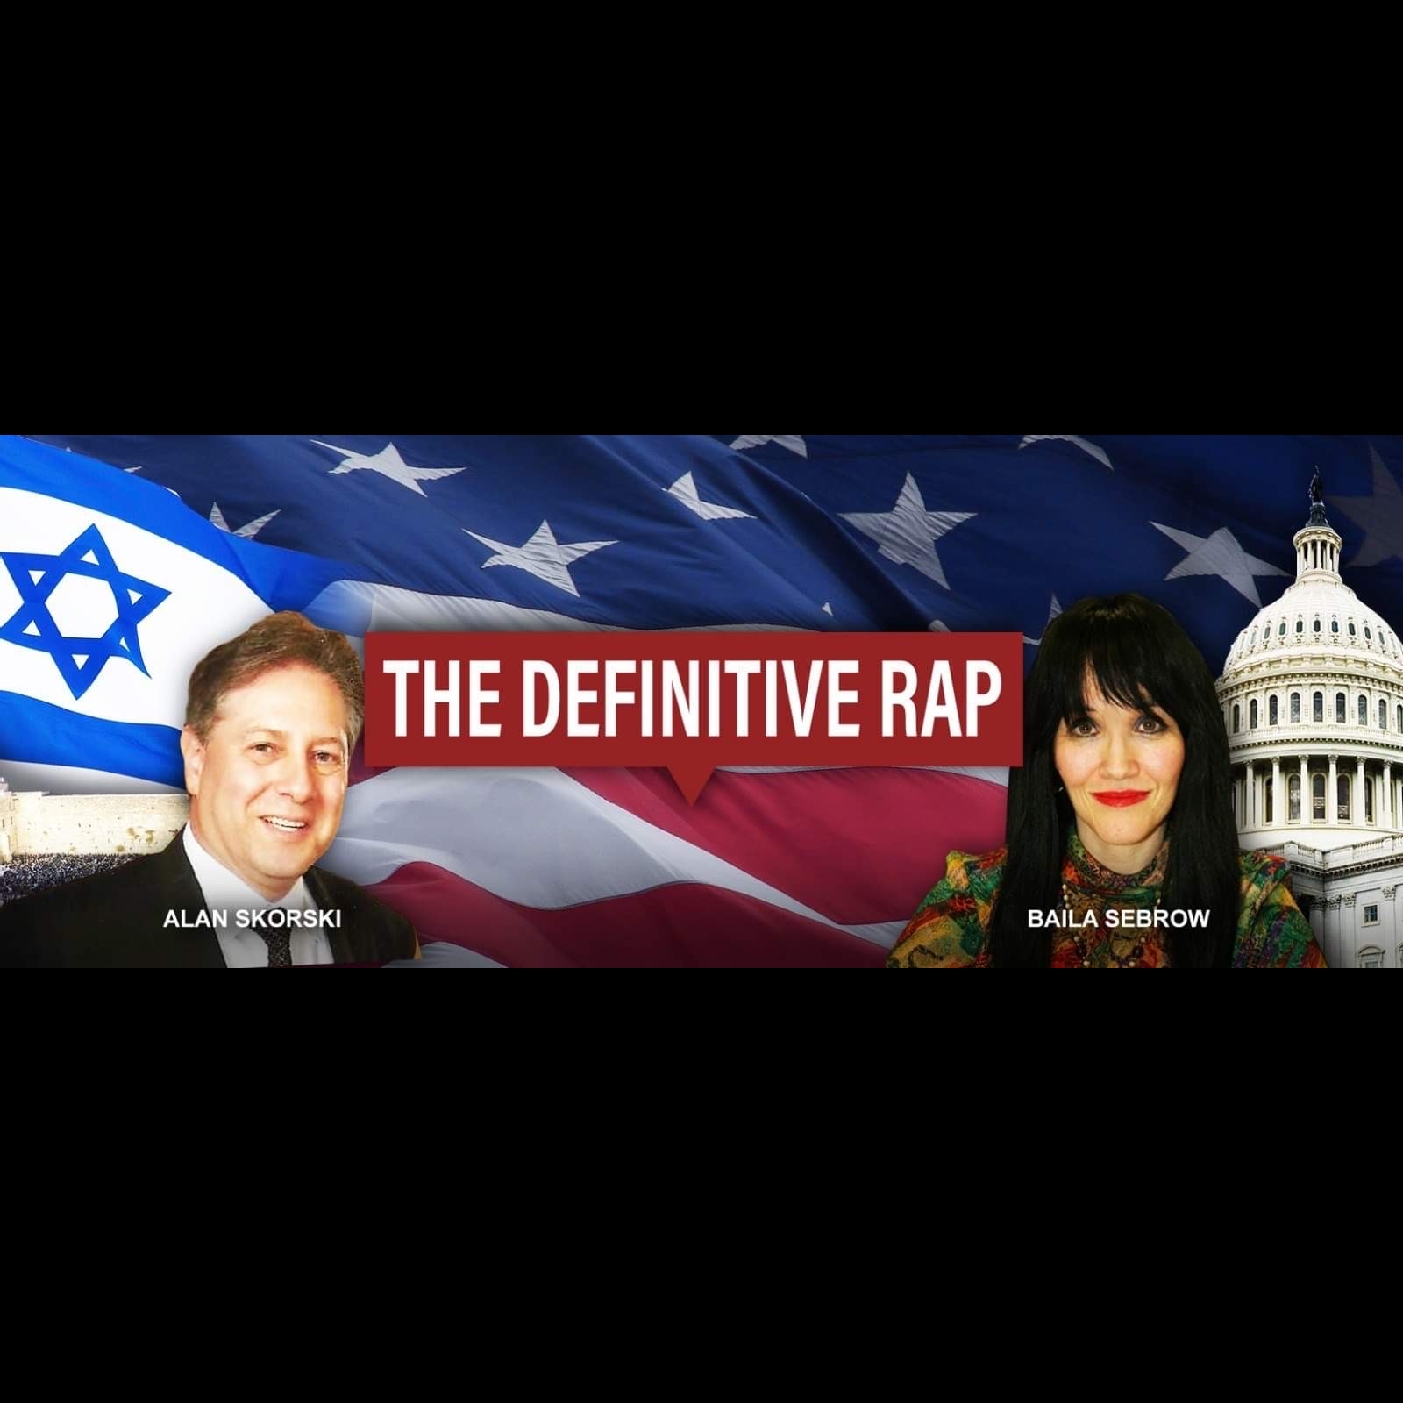 12/17/20 Interview with JNS Editor in Chief, Jonathan Tobin, as we discuss his recent column on the Jewish Left's whitewashing the long anti-Israel record of US Senate candidate from GA., Raphael Warn